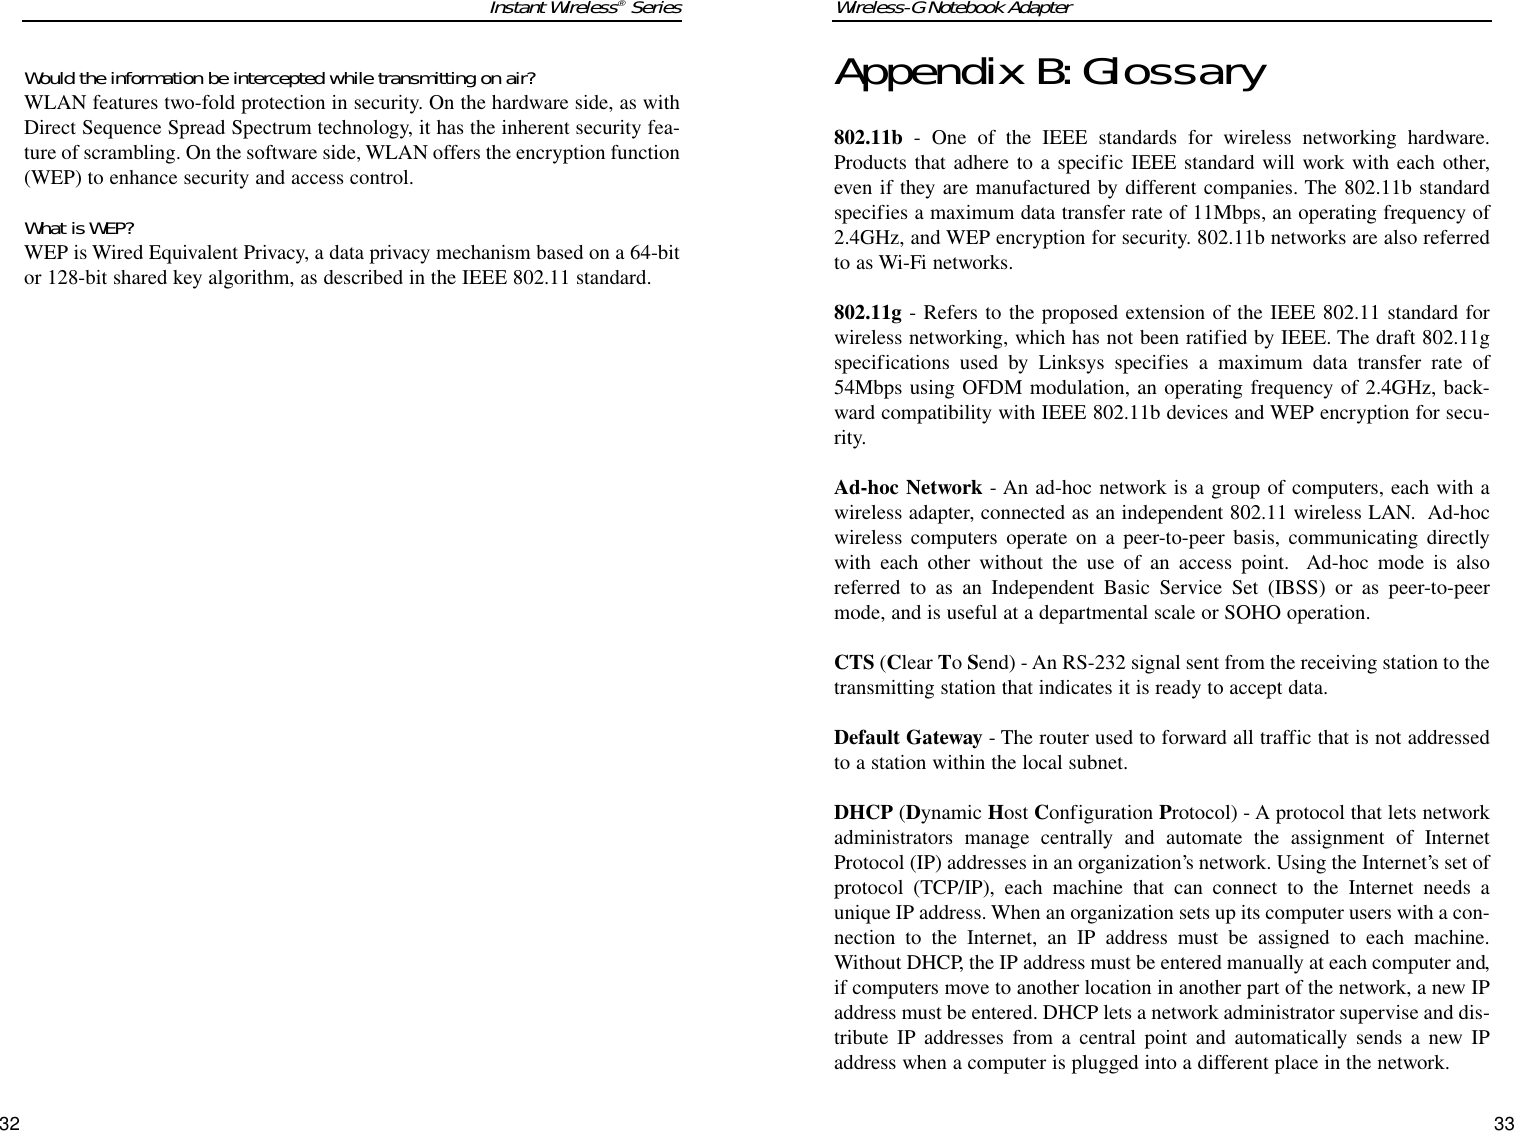 Appendix B:Glossary802.11b - One of the IEEE standards for wireless networking hardware.Products that adhere to a specific IEEE standard will work with each other,even if they are manufactured by different companies. The 802.11b standardspecifies a maximum data transfer rate of 11Mbps, an operating frequency of2.4GHz, and WEP encryption for security. 802.11b networks are also referredto as Wi-Fi networks.802.11g - Refers to the proposed extension of the IEEE 802.11 standard forwireless networking, which has not been ratified by IEEE. The draft 802.11gspecifications used by Linksys specifies a maximum data transfer rate of54Mbps using OFDM modulation, an operating frequency of 2.4GHz, back-ward compatibility with IEEE 802.11b devices and WEP encryption for secu-rity.Ad-hoc Network - An ad-hoc network is a group of computers, each with awireless adapter, connected as an independent 802.11 wireless LAN.  Ad-hocwireless computers operate on a peer-to-peer basis, communicating directlywith each other without the use of an access point.  Ad-hoc mode is alsoreferred to as an Independent Basic Service Set (IBSS) or as peer-to-peermode, and is useful at a departmental scale or SOHO operation.CTS (Clear To Send) - An RS-232 signal sent from the receiving station to thetransmitting station that indicates it is ready to accept data.Default Gateway - The router used to forward all traffic that is not addressedto a station within the local subnet.DHCP (Dynamic Host Configuration Protocol) - A protocol that lets networkadministrators manage centrally and automate the assignment of InternetProtocol (IP) addresses in an organization’s network. Using the Internet’s set ofprotocol (TCP/IP), each machine that can connect to the Internet needs aunique IP address. When an organization sets up its computer users with a con-nection to the Internet, an IP address must be assigned to each machine.Without DHCP, the IP address must be entered manually at each computer and,if computers move to another location in another part of the network, a new IPaddress must be entered. DHCP lets a network administrator supervise and dis-tribute IP addresses from a central point and automatically sends a new IPaddress when a computer is plugged into a different place in the network. Would the information be intercepted while transmitting on air?WLAN features two-fold protection in security. On the hardware side, as withDirect Sequence Spread Spectrum technology, it has the inherent security fea-ture of scrambling. On the software side, WLAN offers the encryption function(WEP) to enhance security and access control.What is WEP?WEP is Wired Equivalent Privacy, a data privacy mechanism based on a 64-bitor 128-bit shared key algorithm, as described in the IEEE 802.11 standard.Wireless-G Notebook Adapter33Instant Wireless®Series32